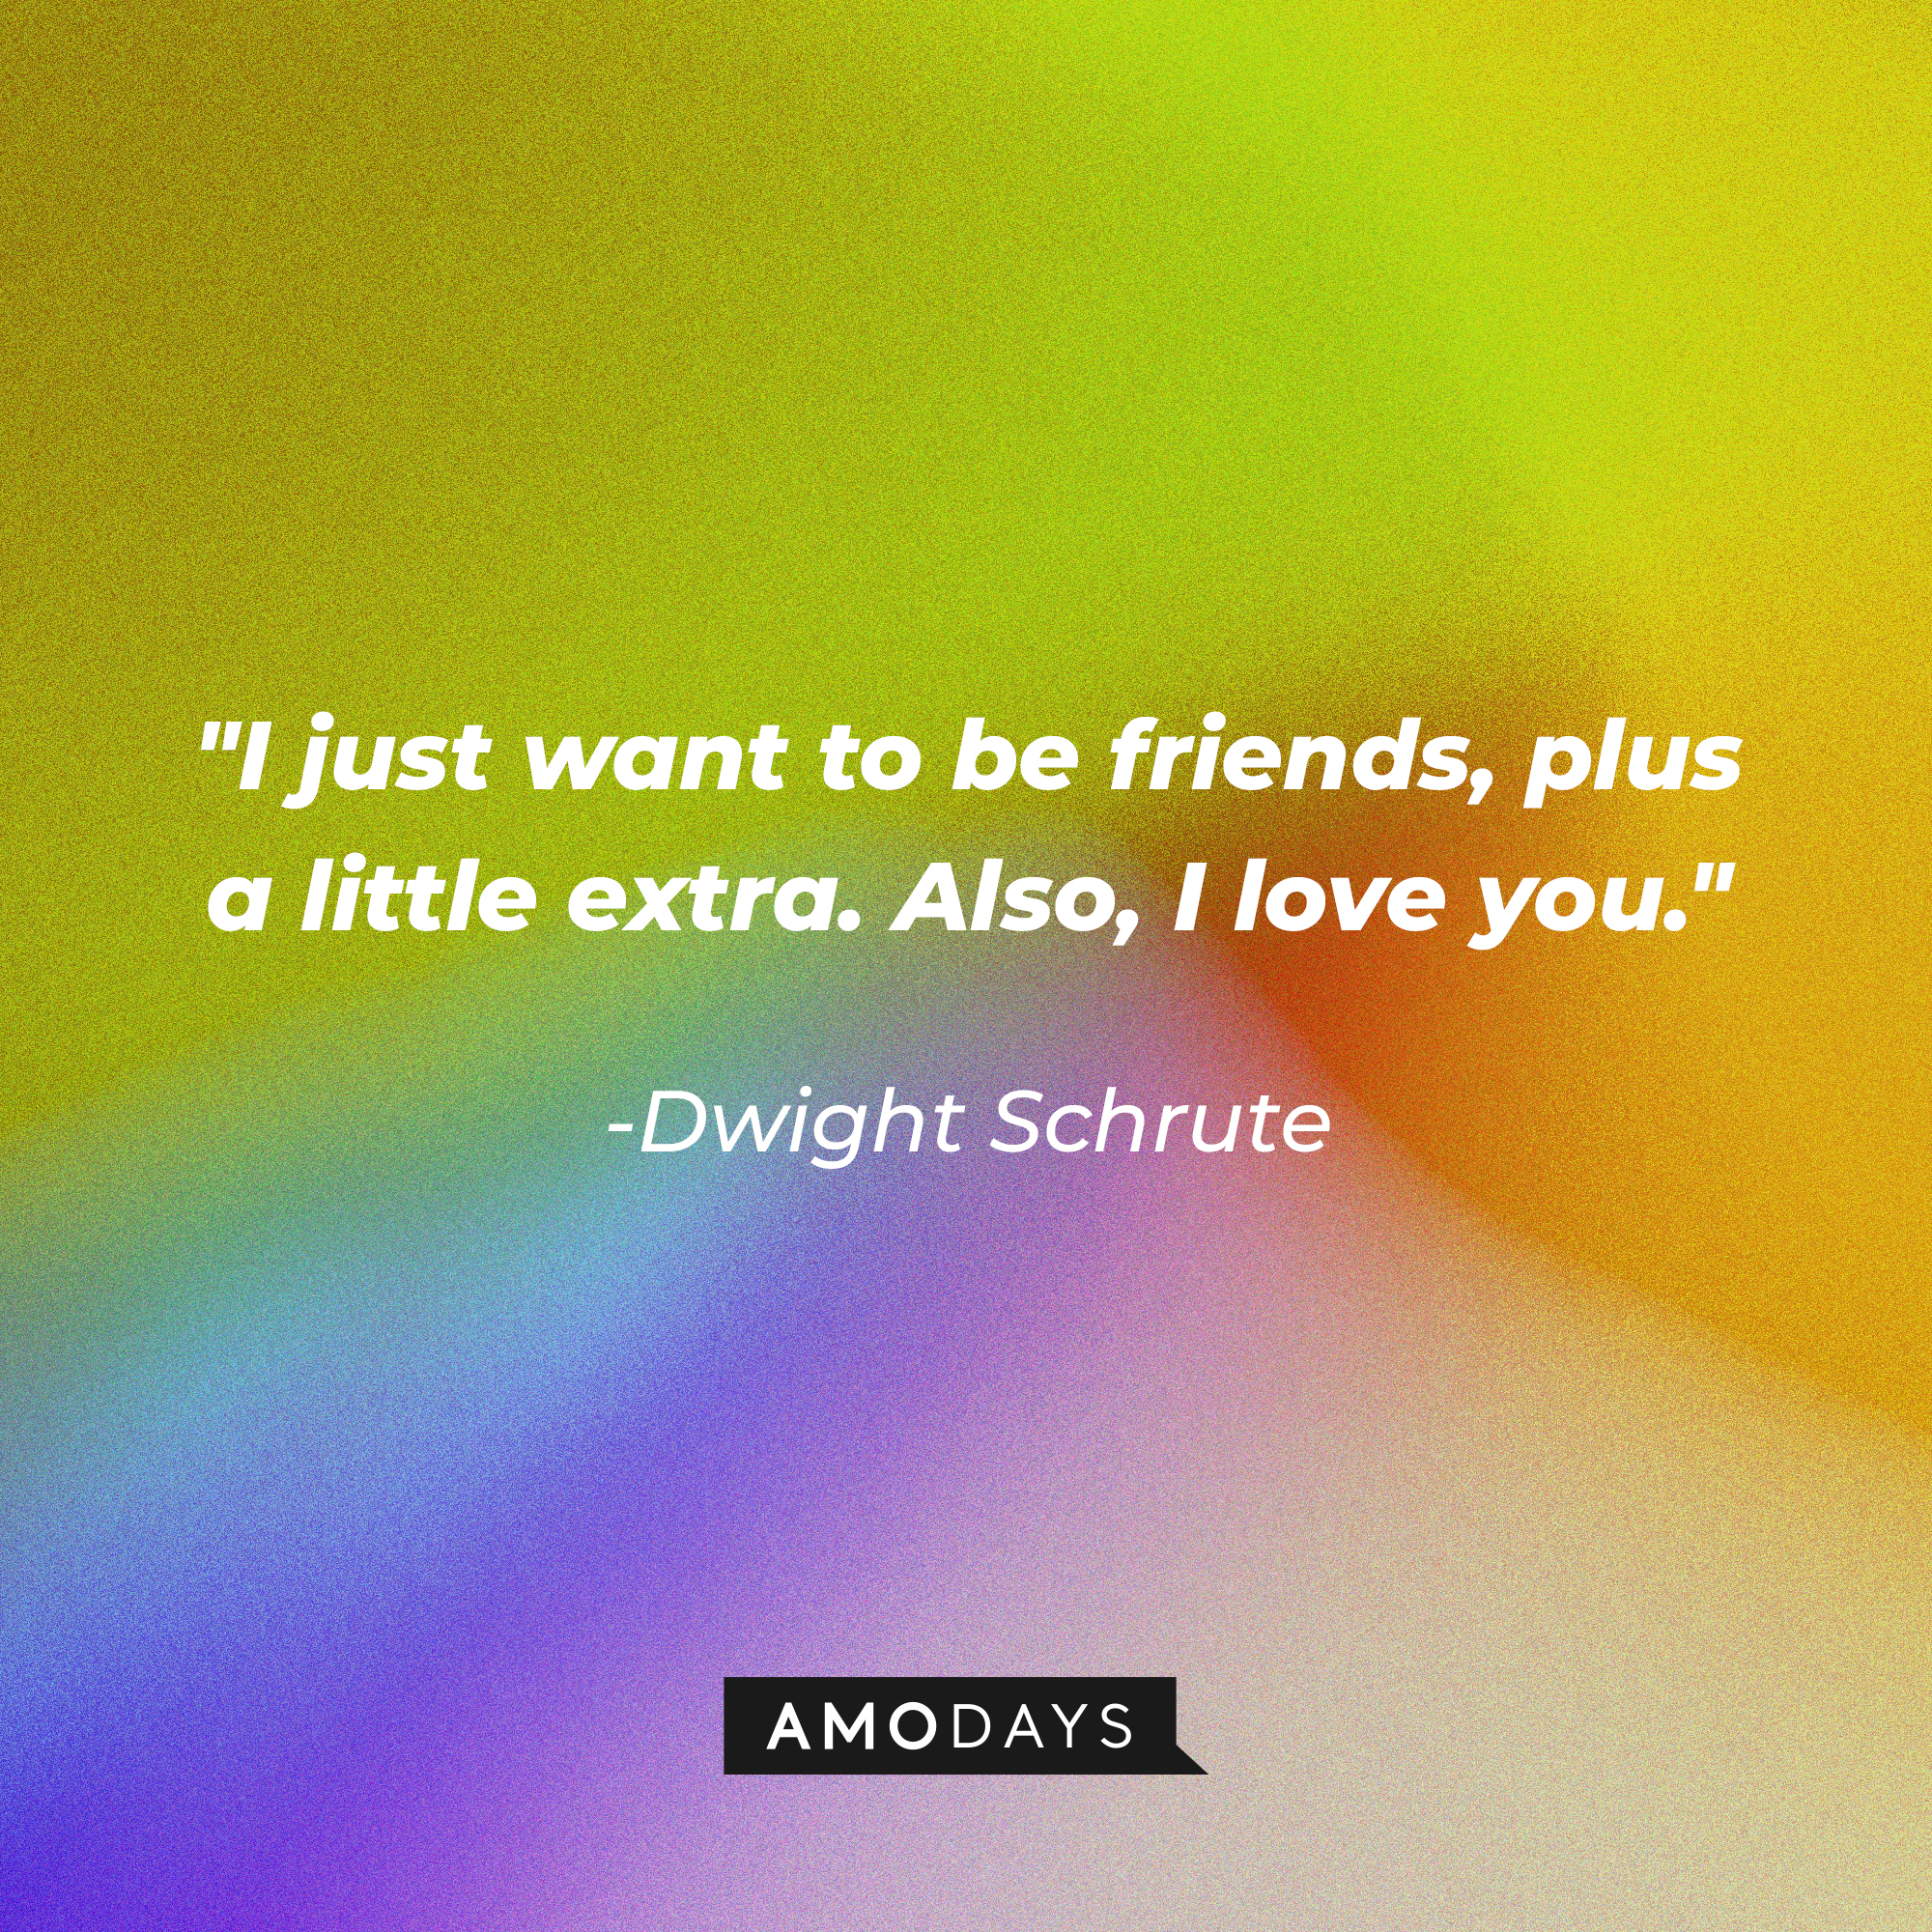 Dwight Schrute’s quote: "I just want to be friends, plus a little extra. Also, I love you." | Image: AmoDays